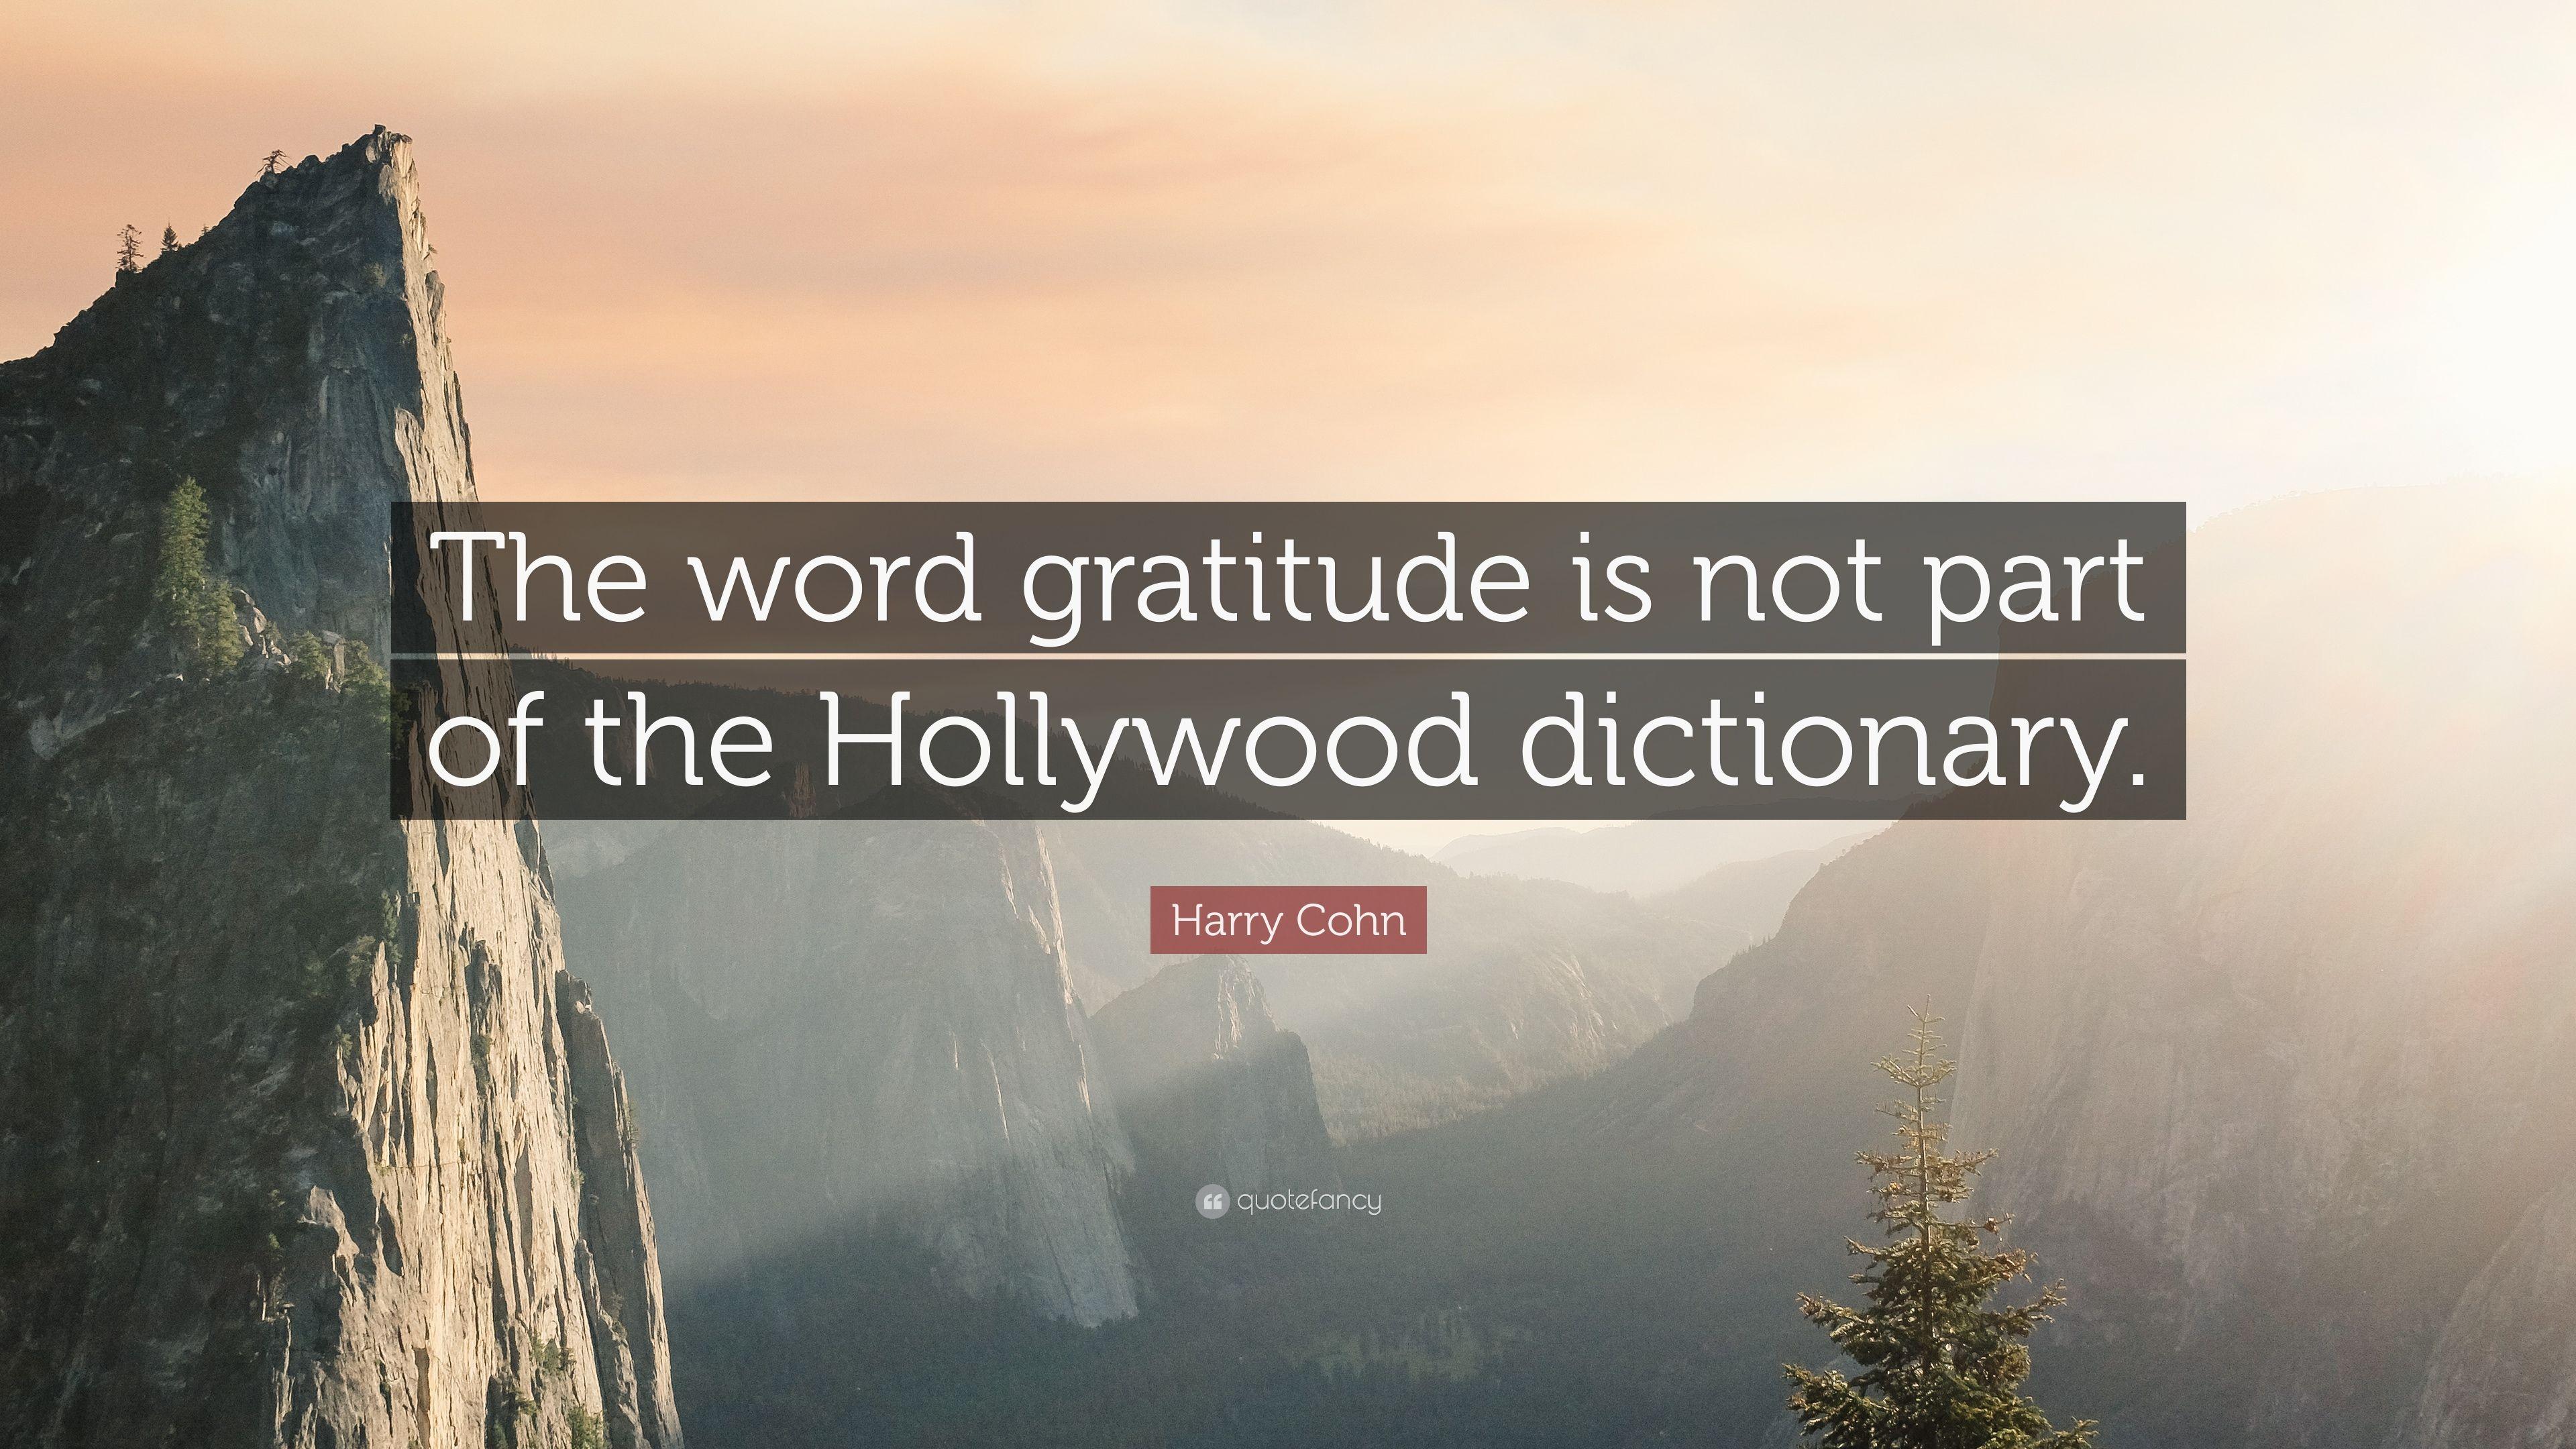 Harry Cohn Quote: “The word gratitude is not part of the Hollywood